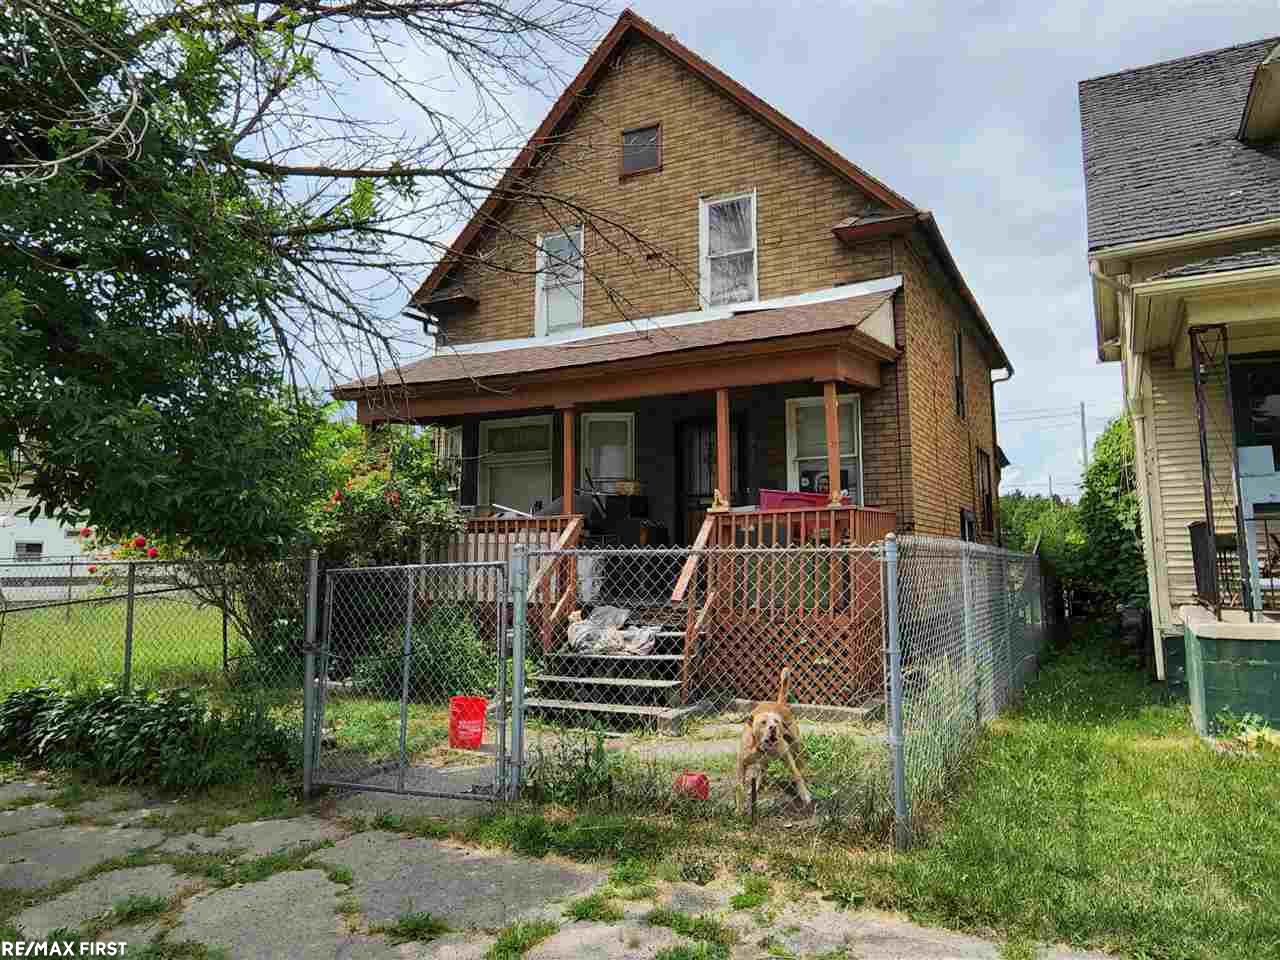 Near Downtown and Hamtramck. Seller has Many listings in this area. Possible Redevelopment? No Inside Showings. House is completely packed with Hoarders' Collection. Will need MANY DUMPSTERS to clear it out. Cash Only. Zoned Commercial.